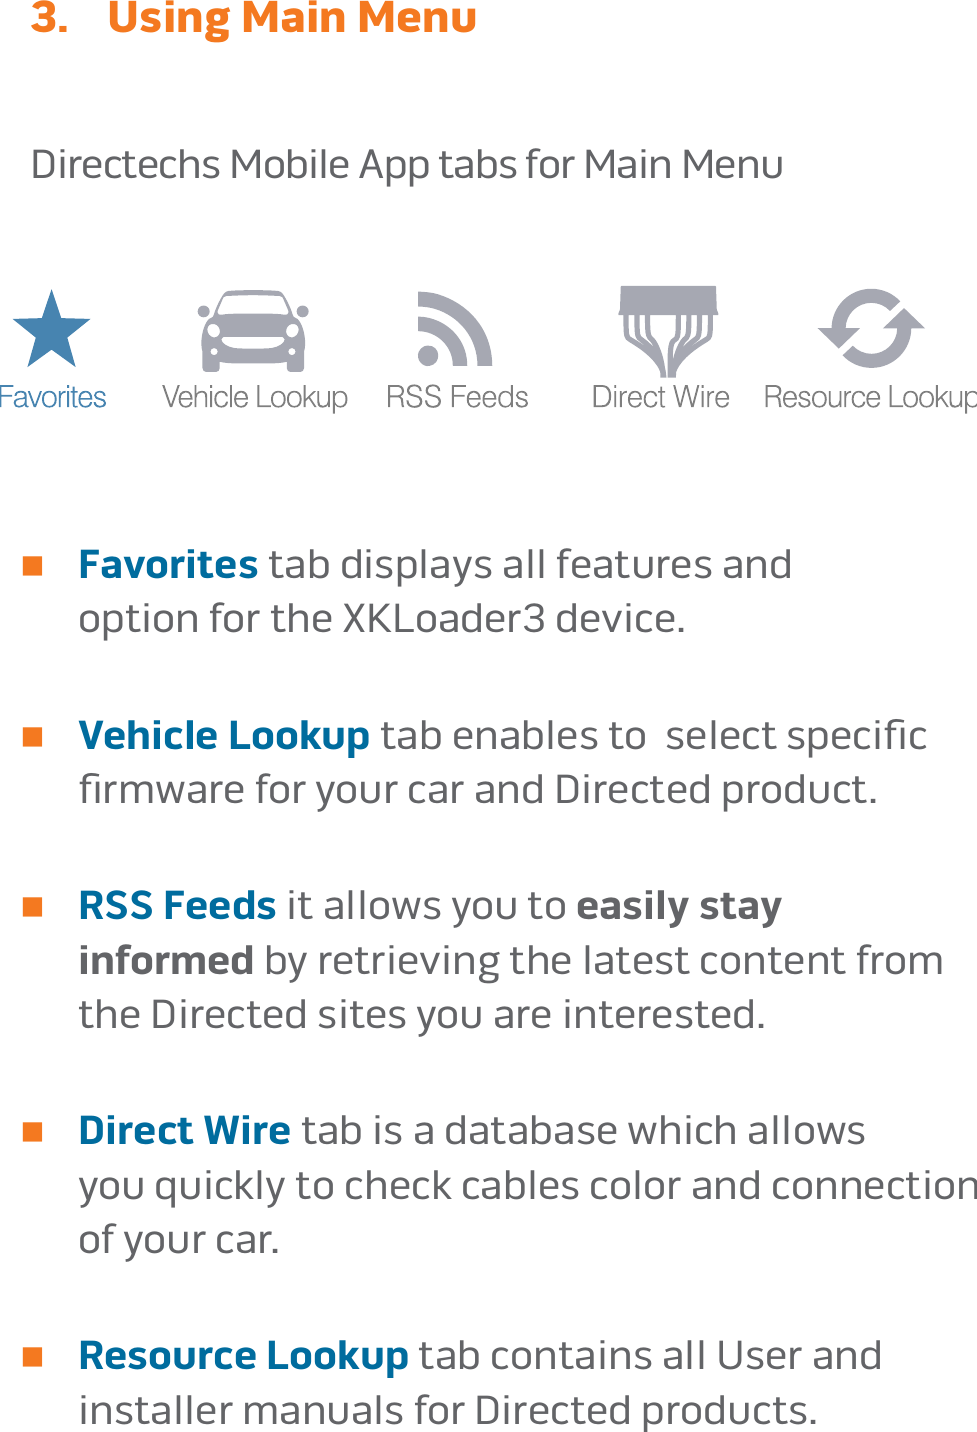 page 163.  Using Main MenuDirectechs Mobile App tabs for Main Menun   Favorites tab displays all features and  option for the XKLoader3 device� n   Vehicle Lookup tab enables to  select speciﬁc  ﬁrmware for your car and Directed product�n    RSS Feeds it allows you to easily stay  informed by retrieving the latest content from  the Directed sites you are interested�n    Direct Wire tab is a database which allows  you quickly to check cables color and connection  of your car�n    Resource Lookup tab contains all User and  installer manuals for Directed products�